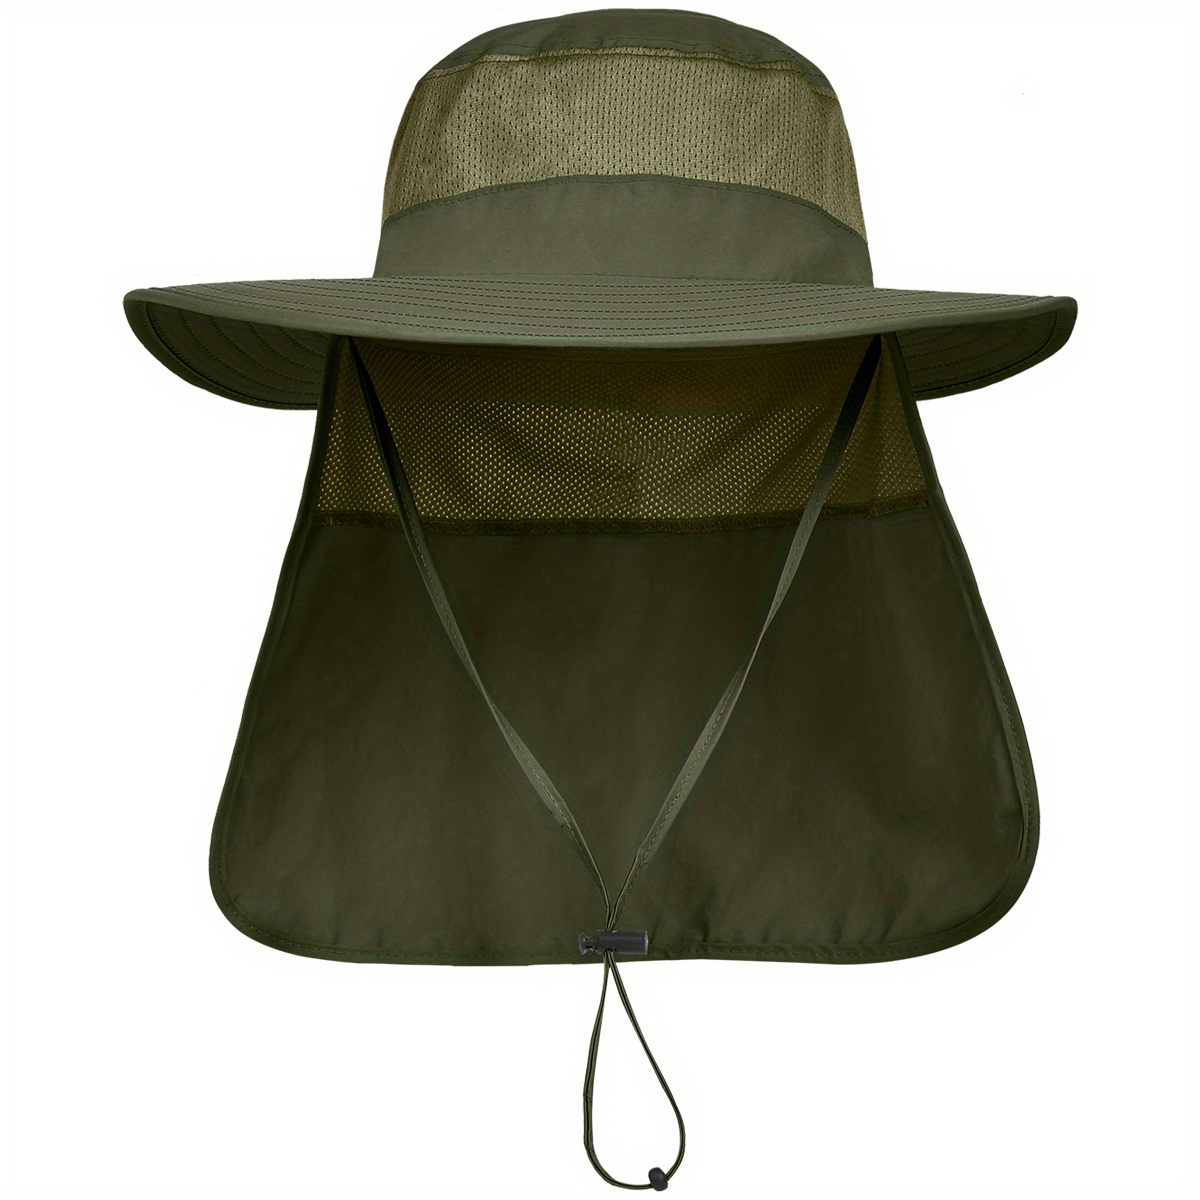 Fishing Hat With Neck Flap For Men Upf 50+ Sun Protection Hiking